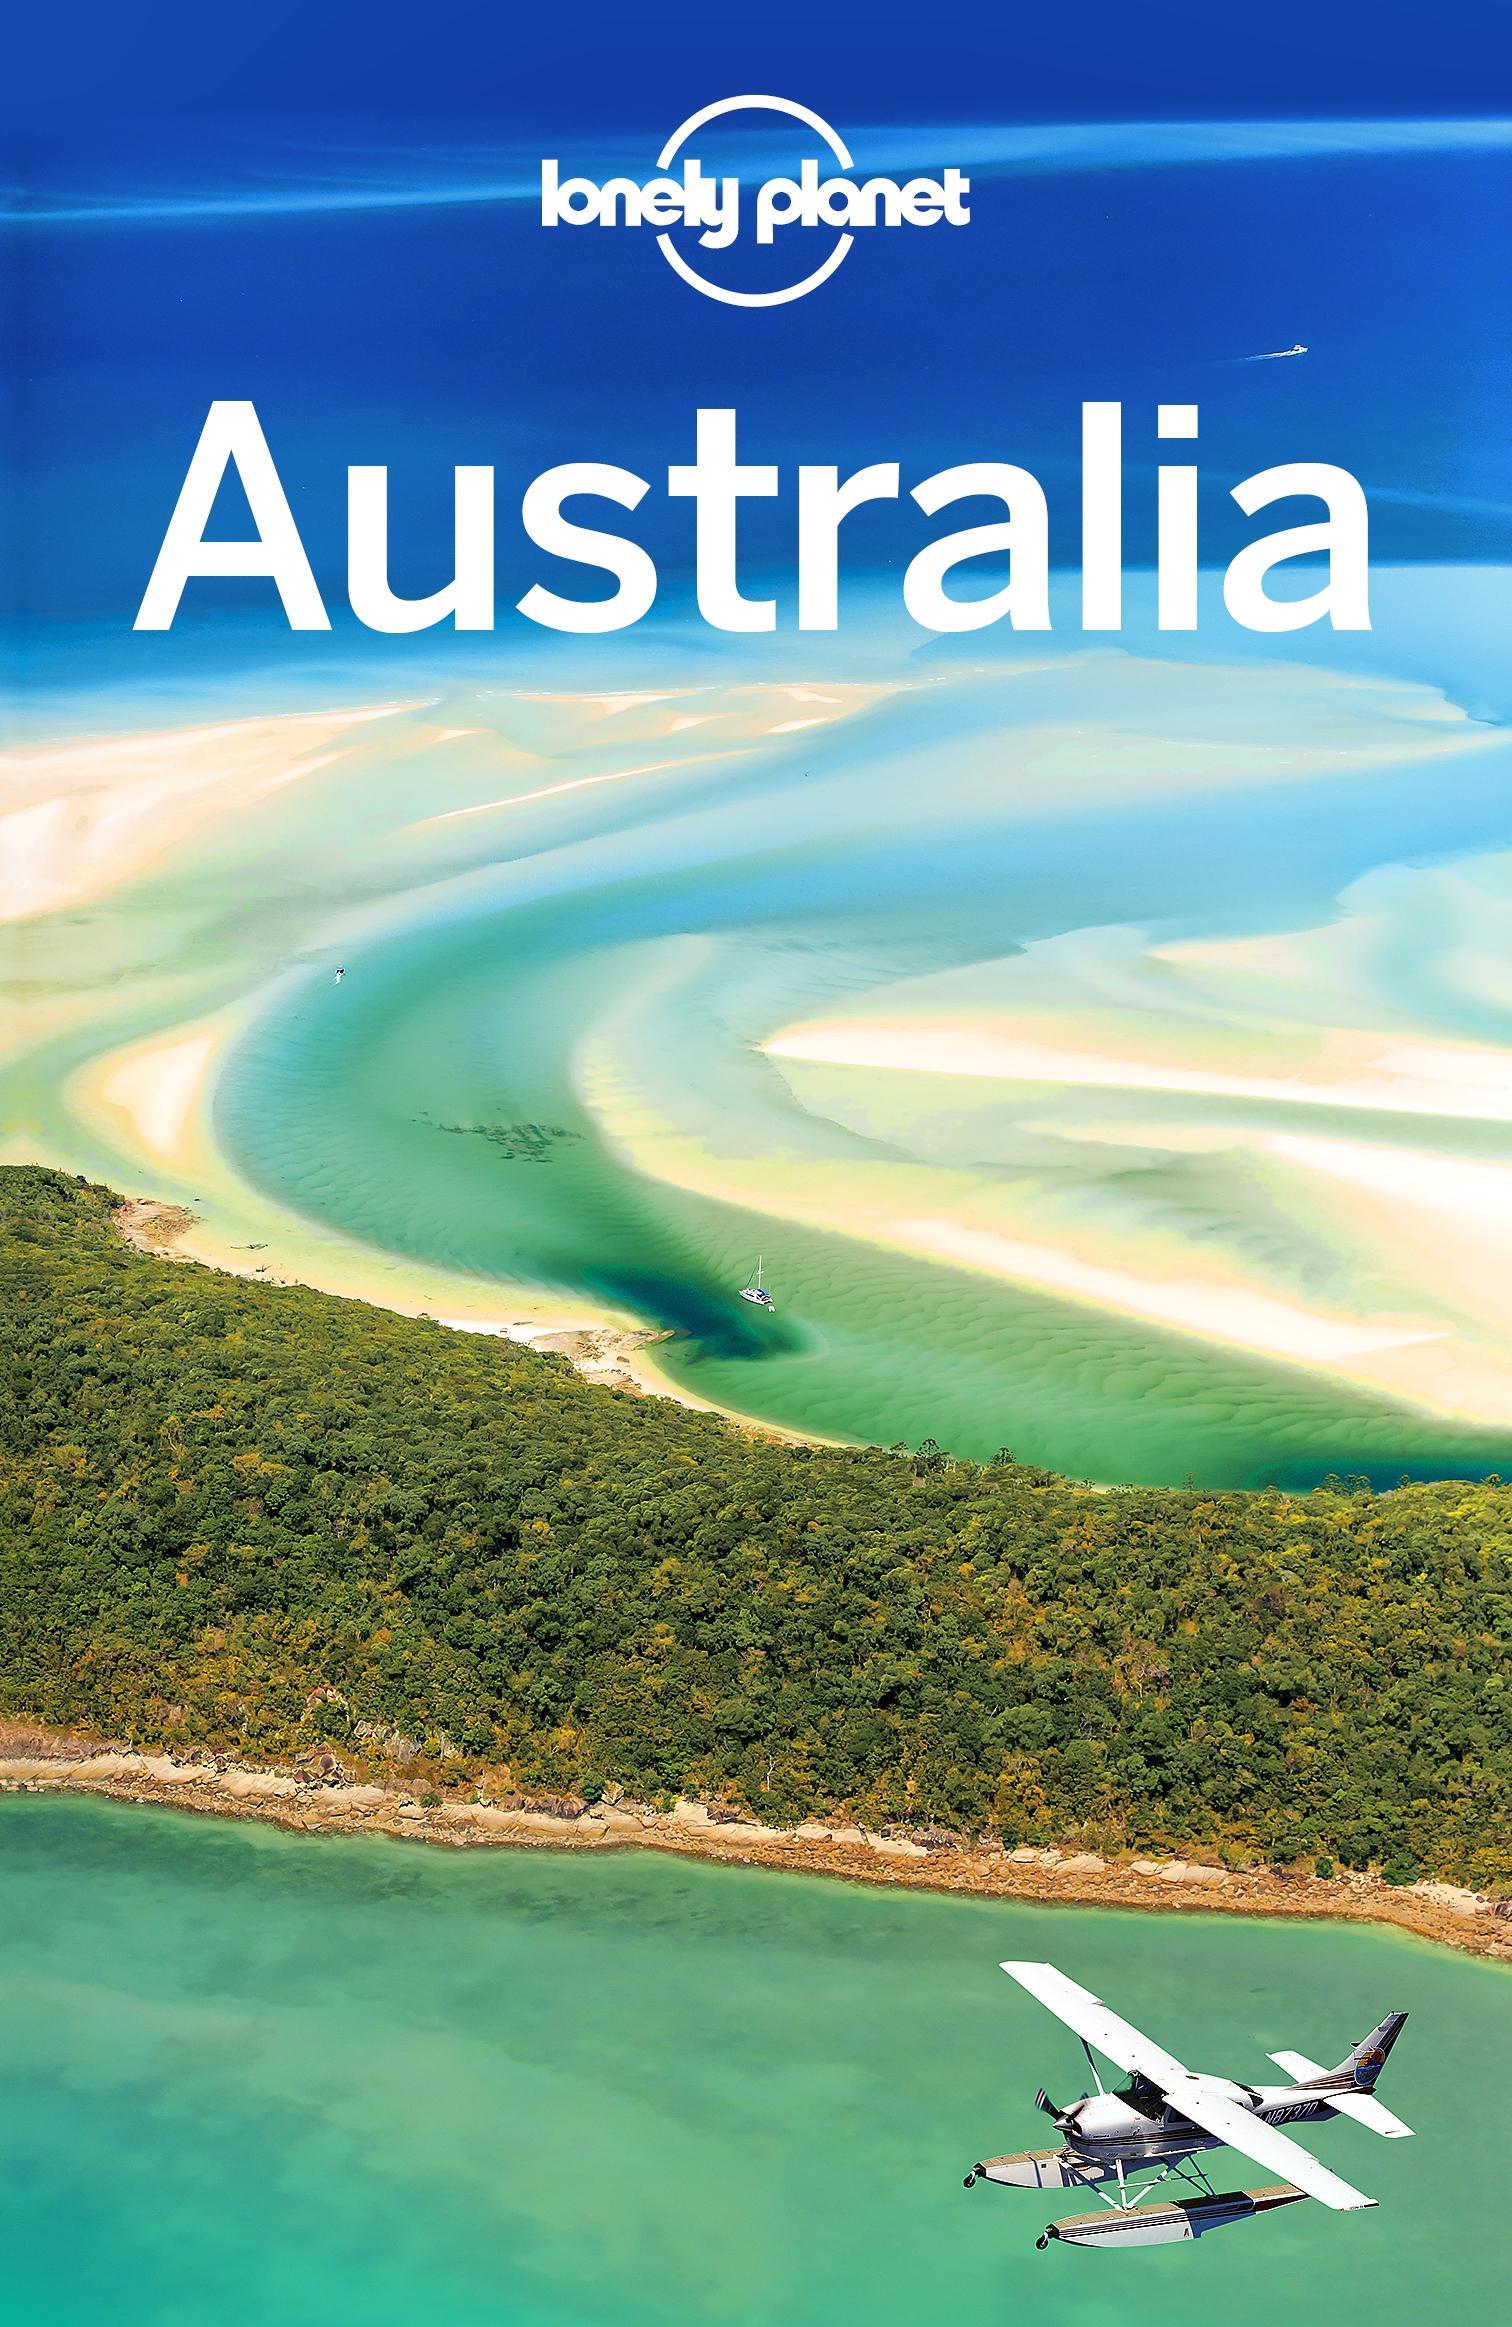 Planet　Planet　Australia　Planet　Guide　eBook　Lonely　v.　Lonely　Travel　Lonely　Weltbild